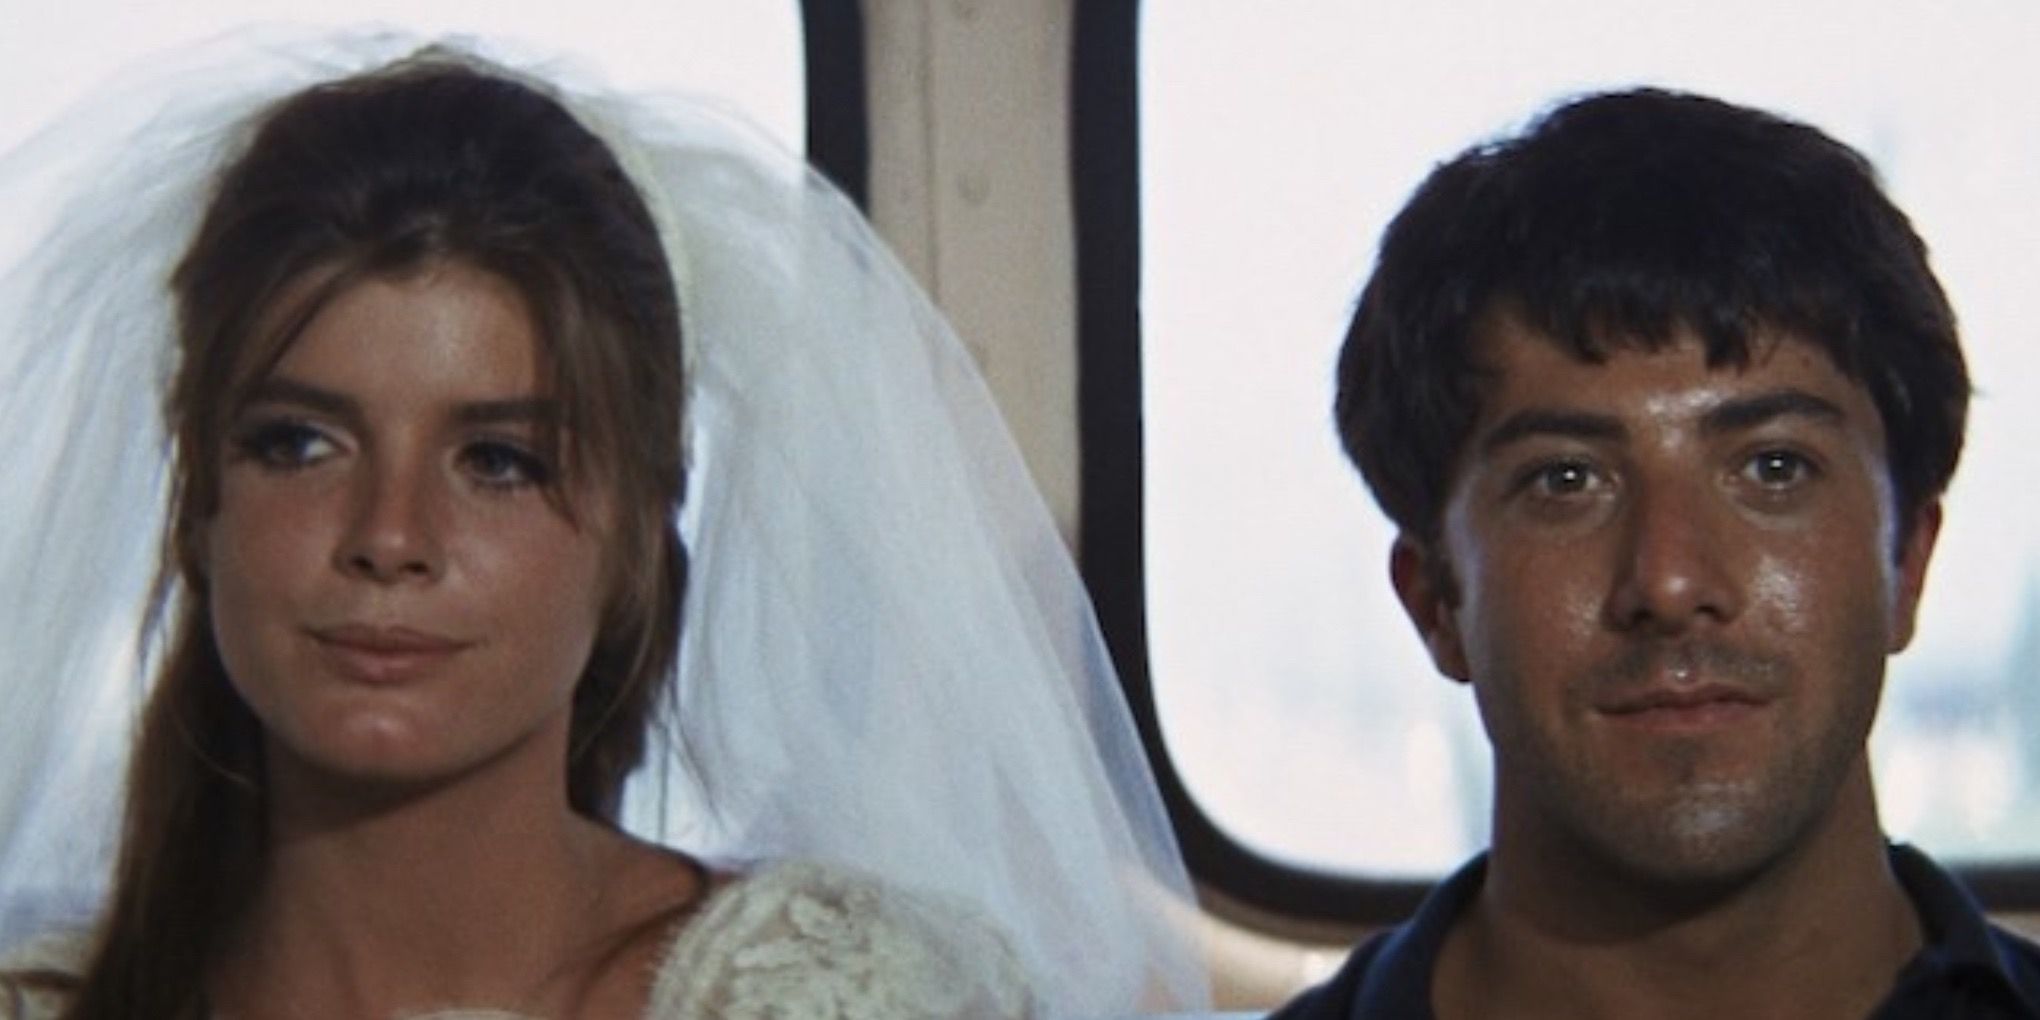 Katharine Ross and Dustin Hoffman in The Graduate (1967)